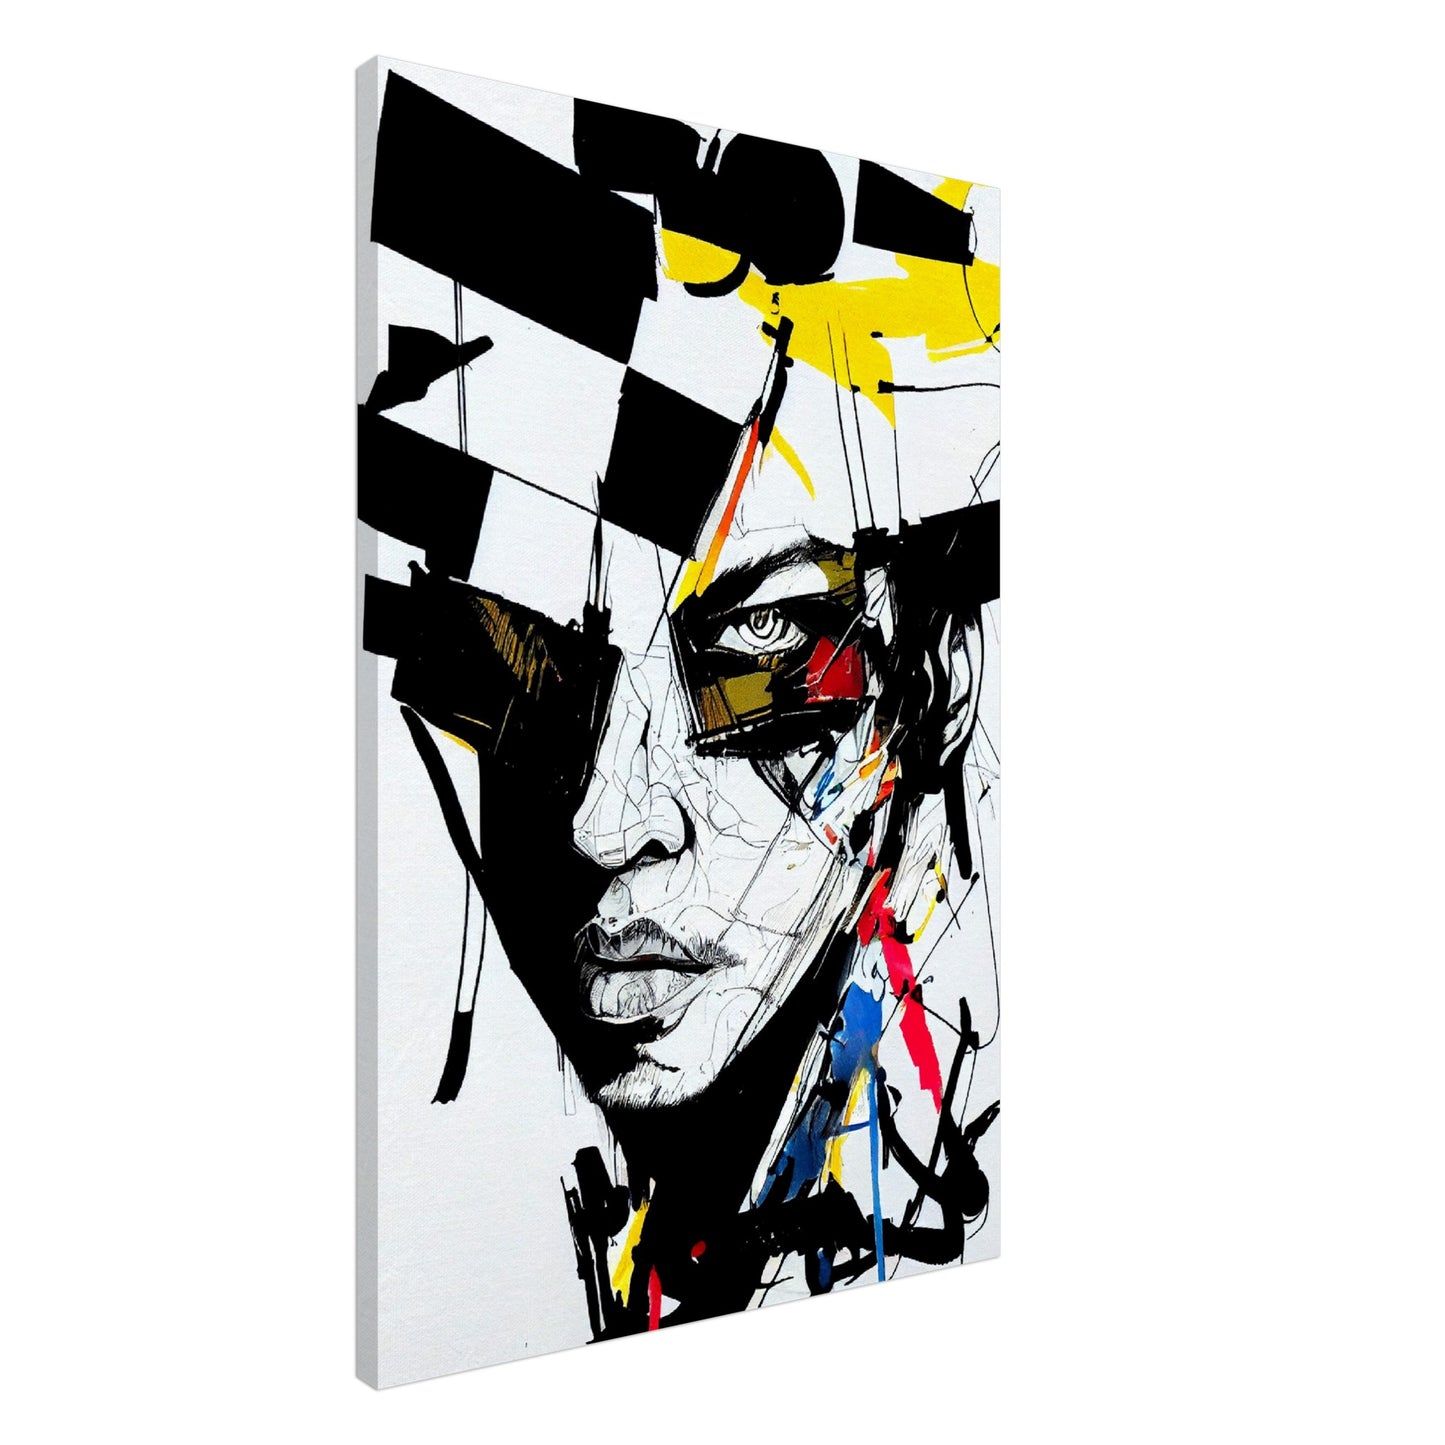 Abstract Geometry Face - Urban Art on Canvas